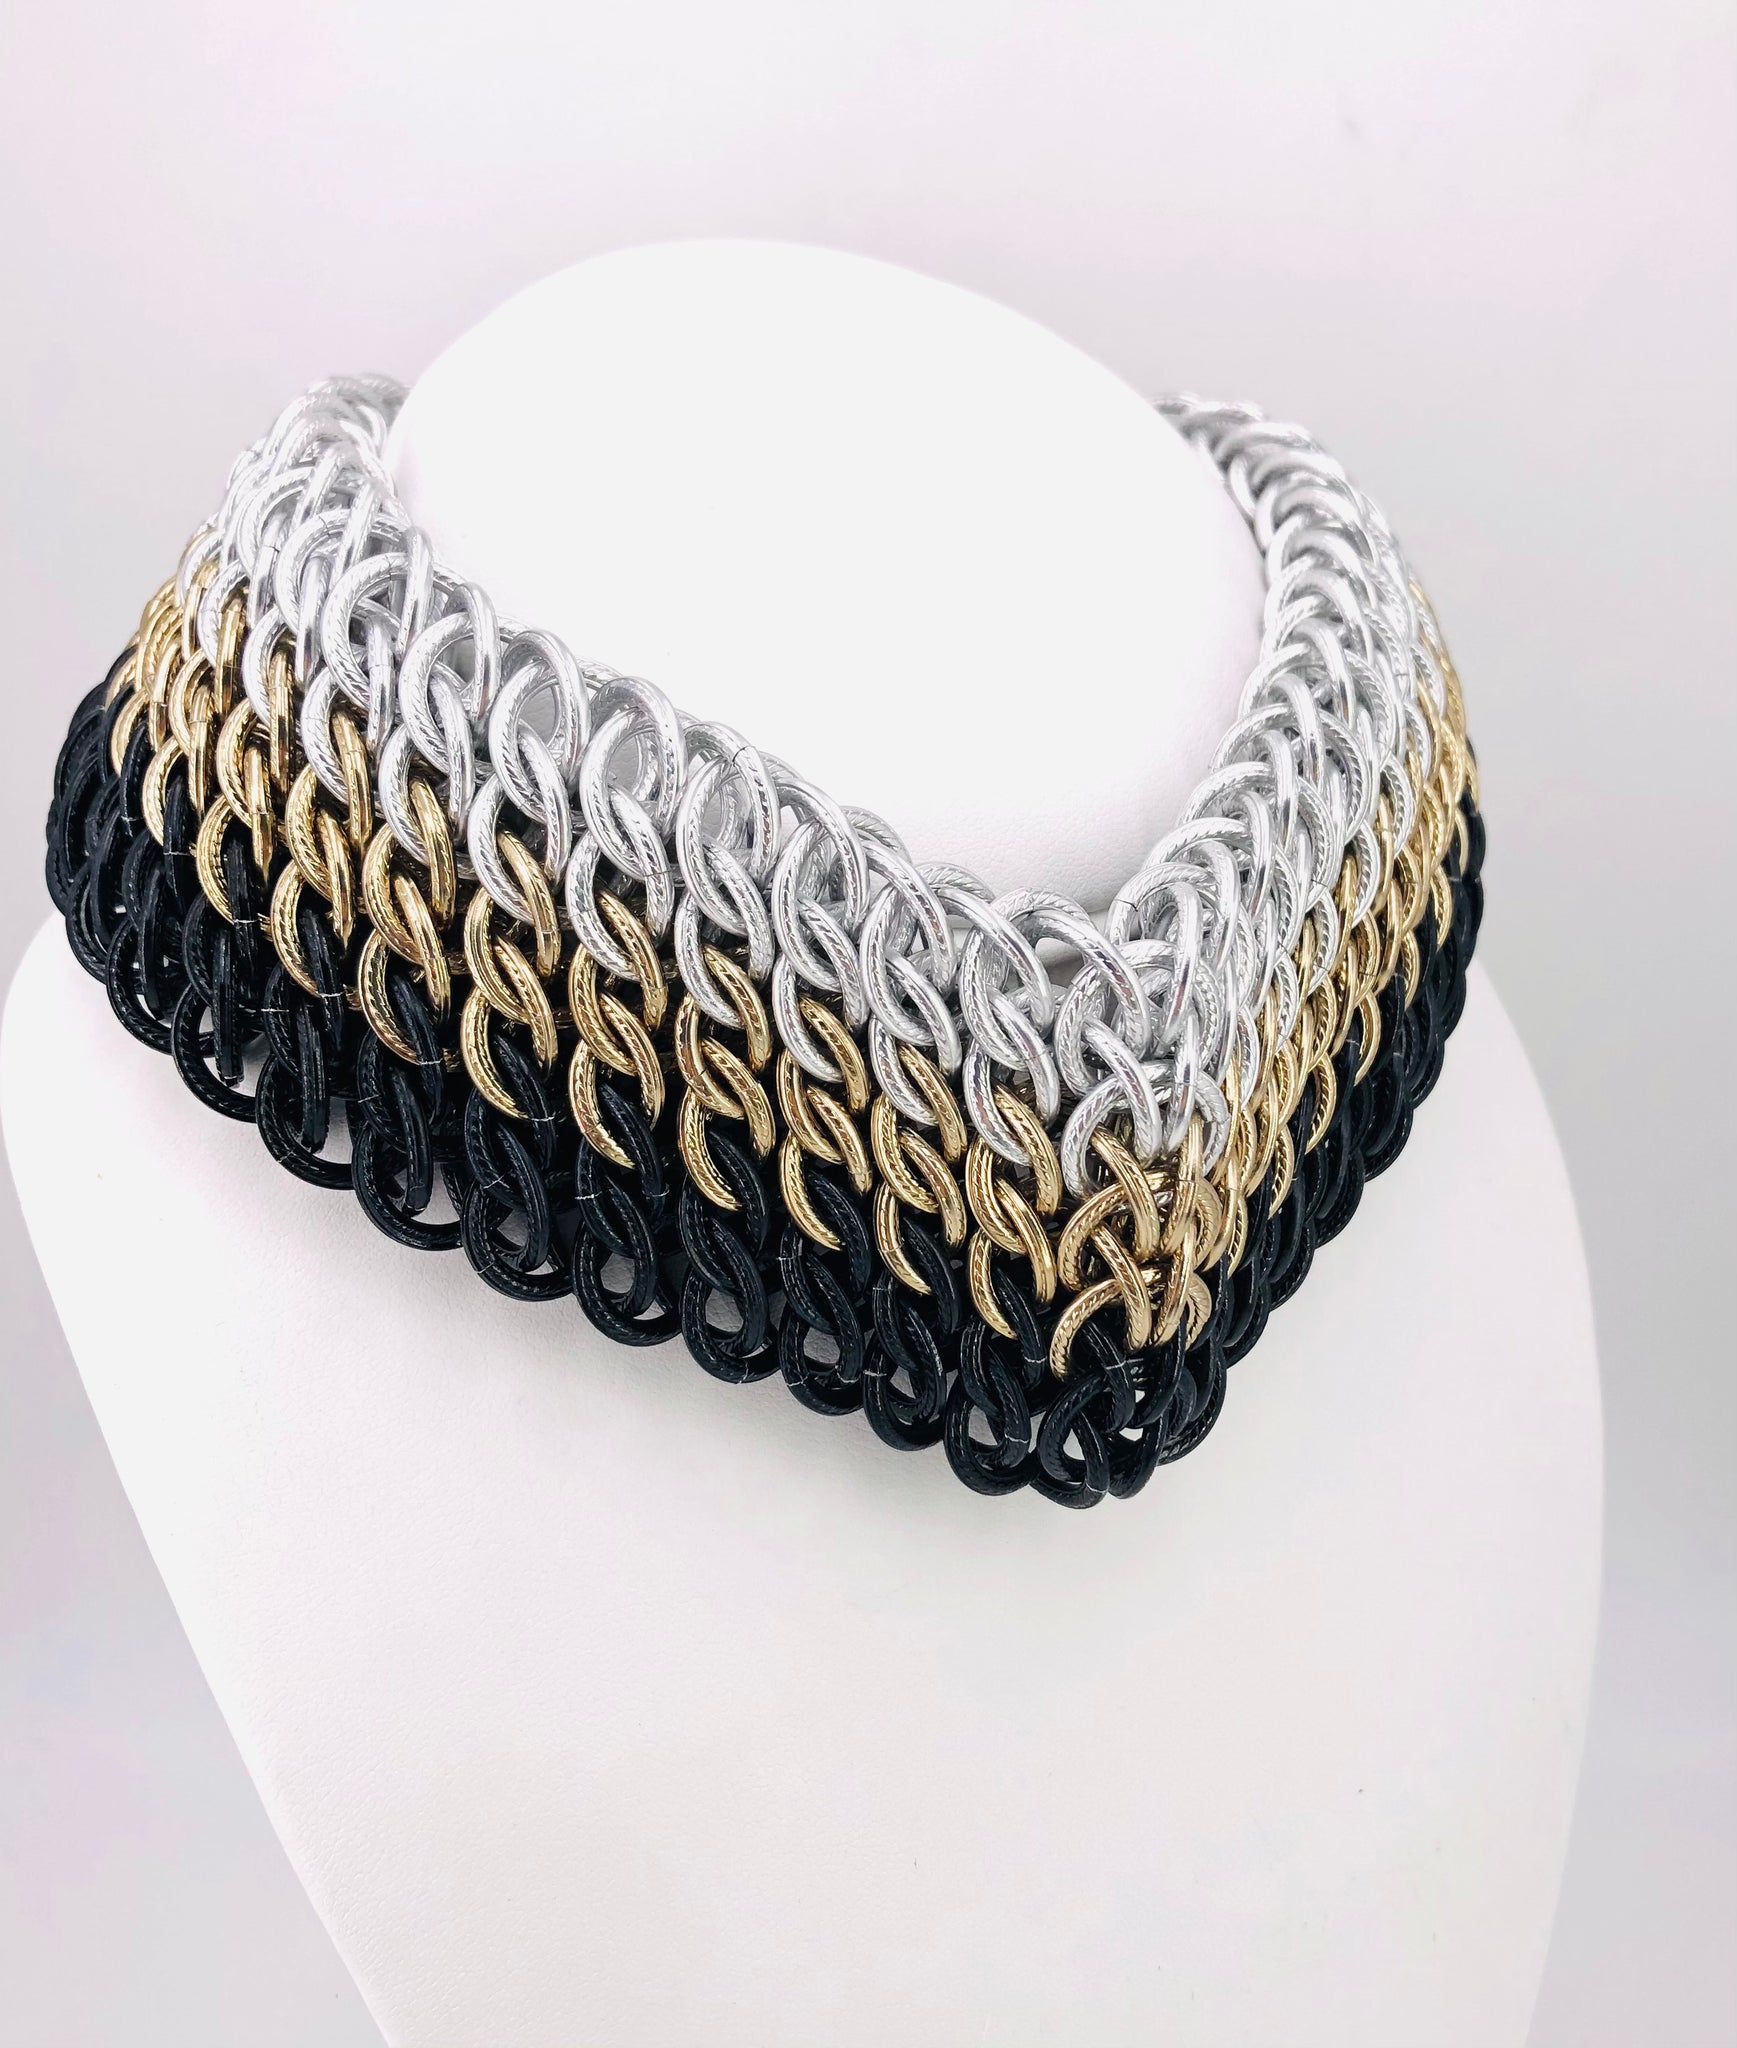 Tri-Color Chainmaille Statement Necklace, Posture Collar